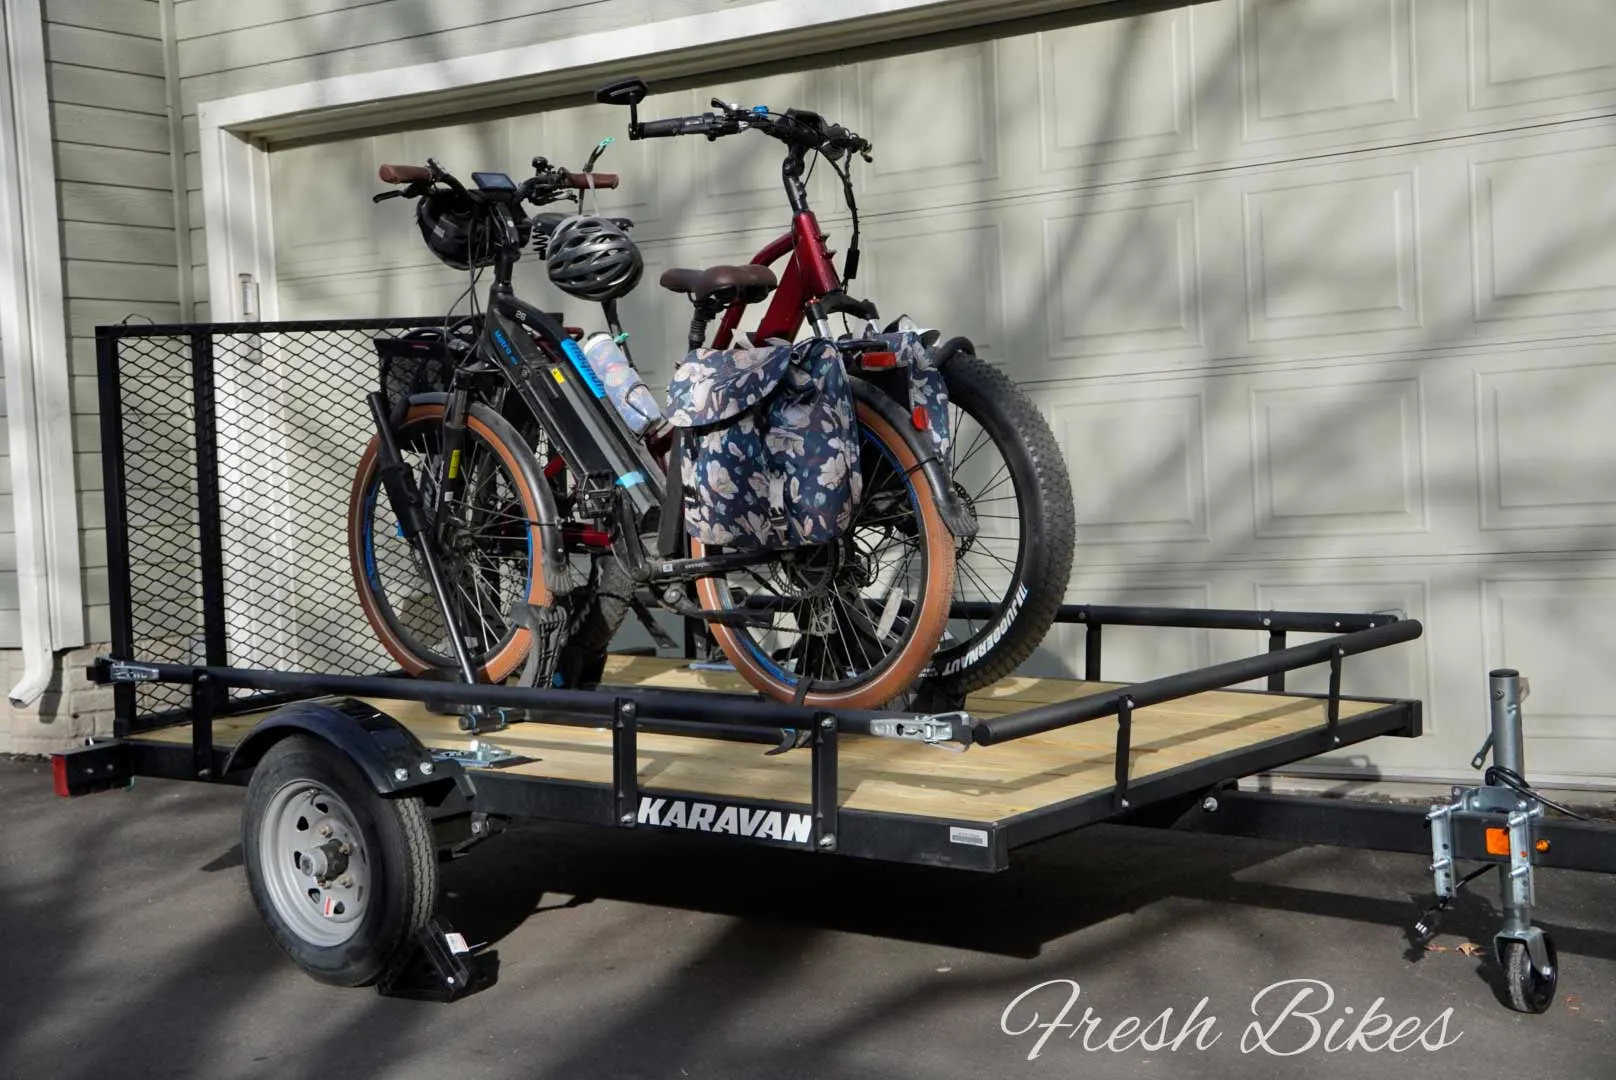 View from the front of the e-bike trailer with two e-bikes loaded and secured.